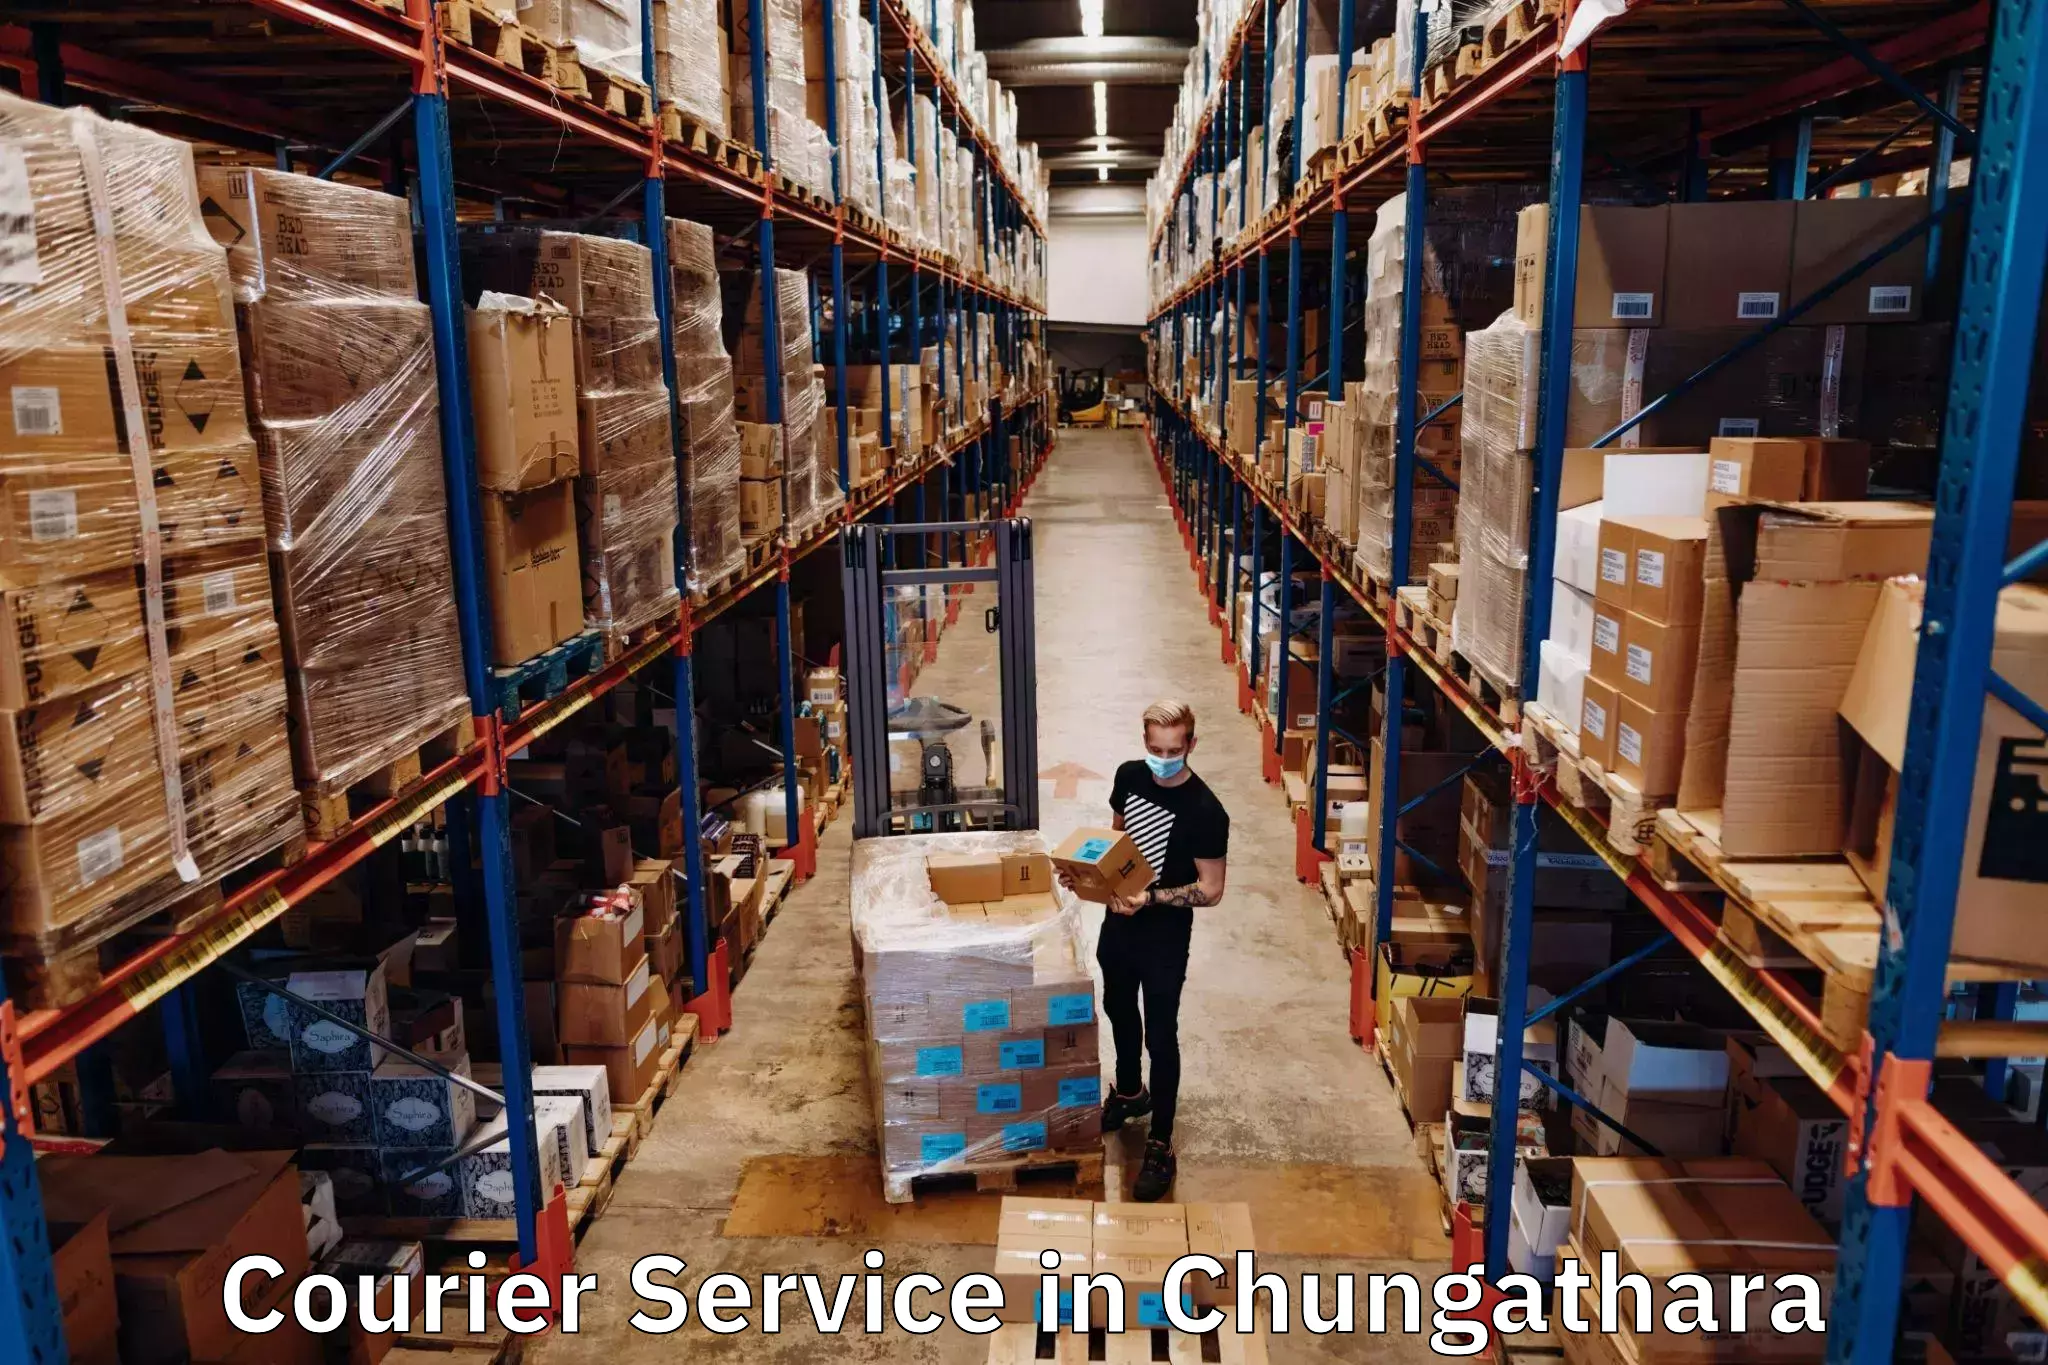 Small business couriers in Chungathara